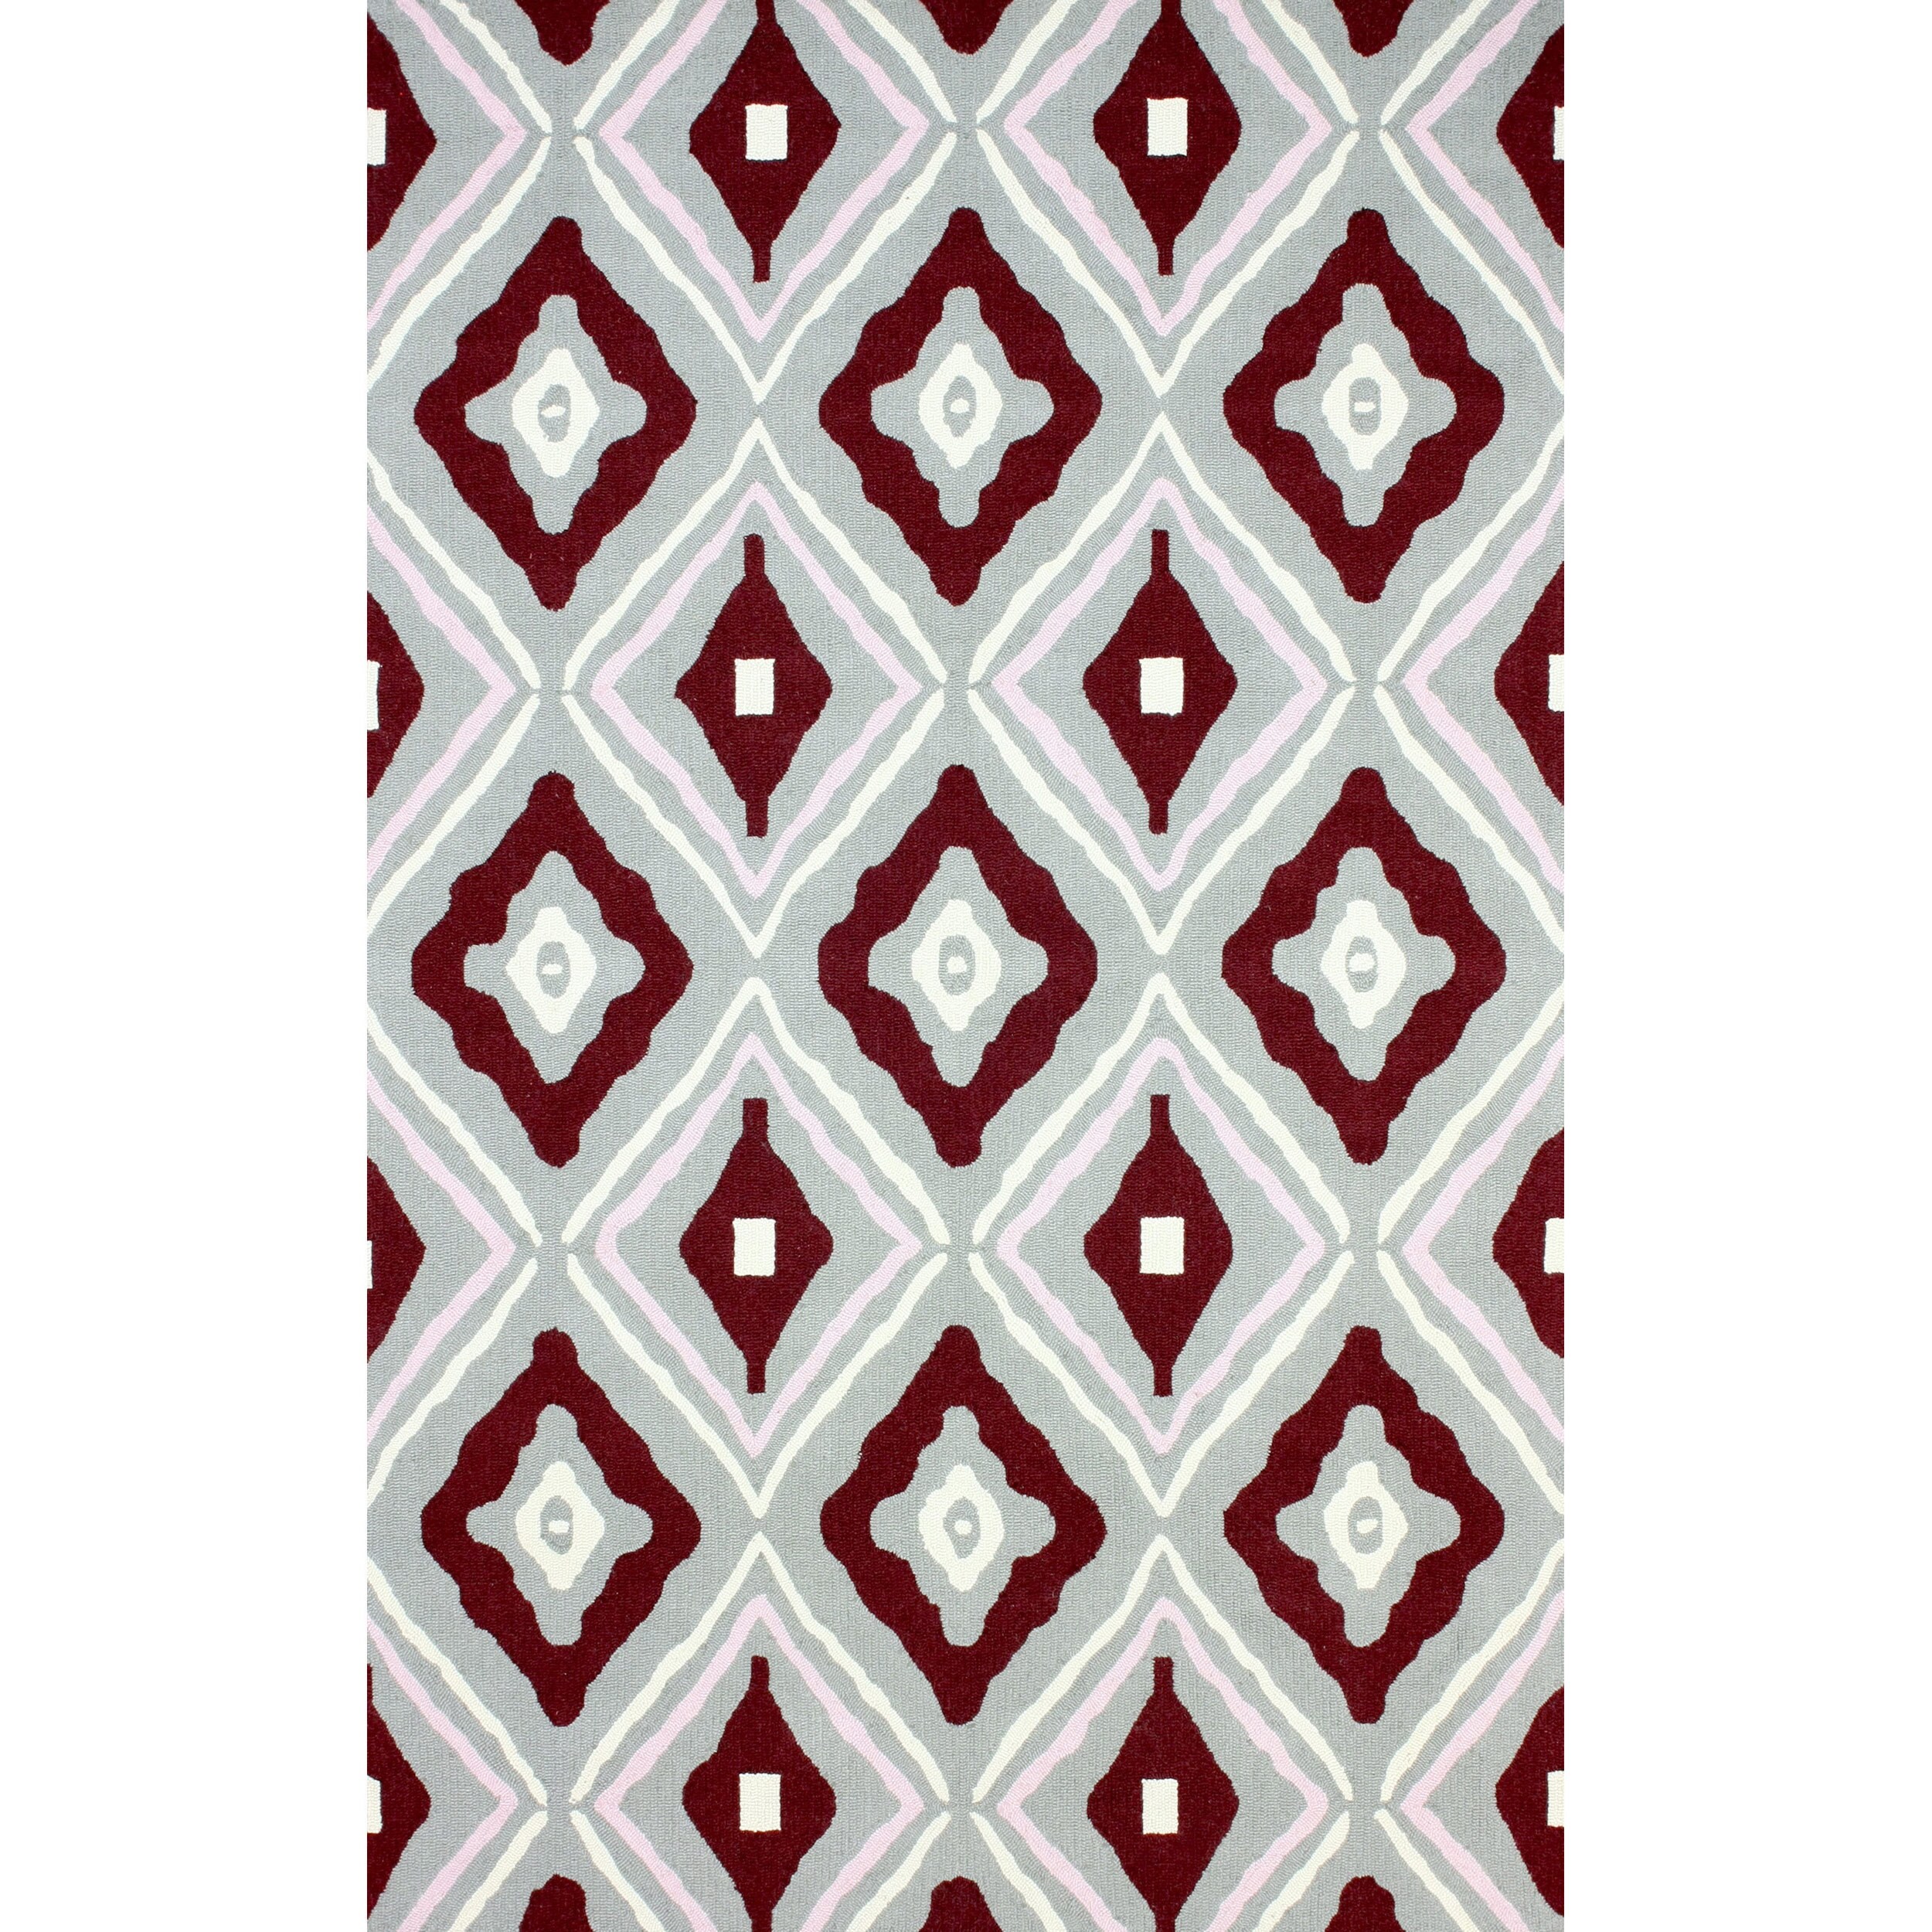 Nuloom Hand hooked Modern Square In Square Burgundy Wool Rug (76 X 96)